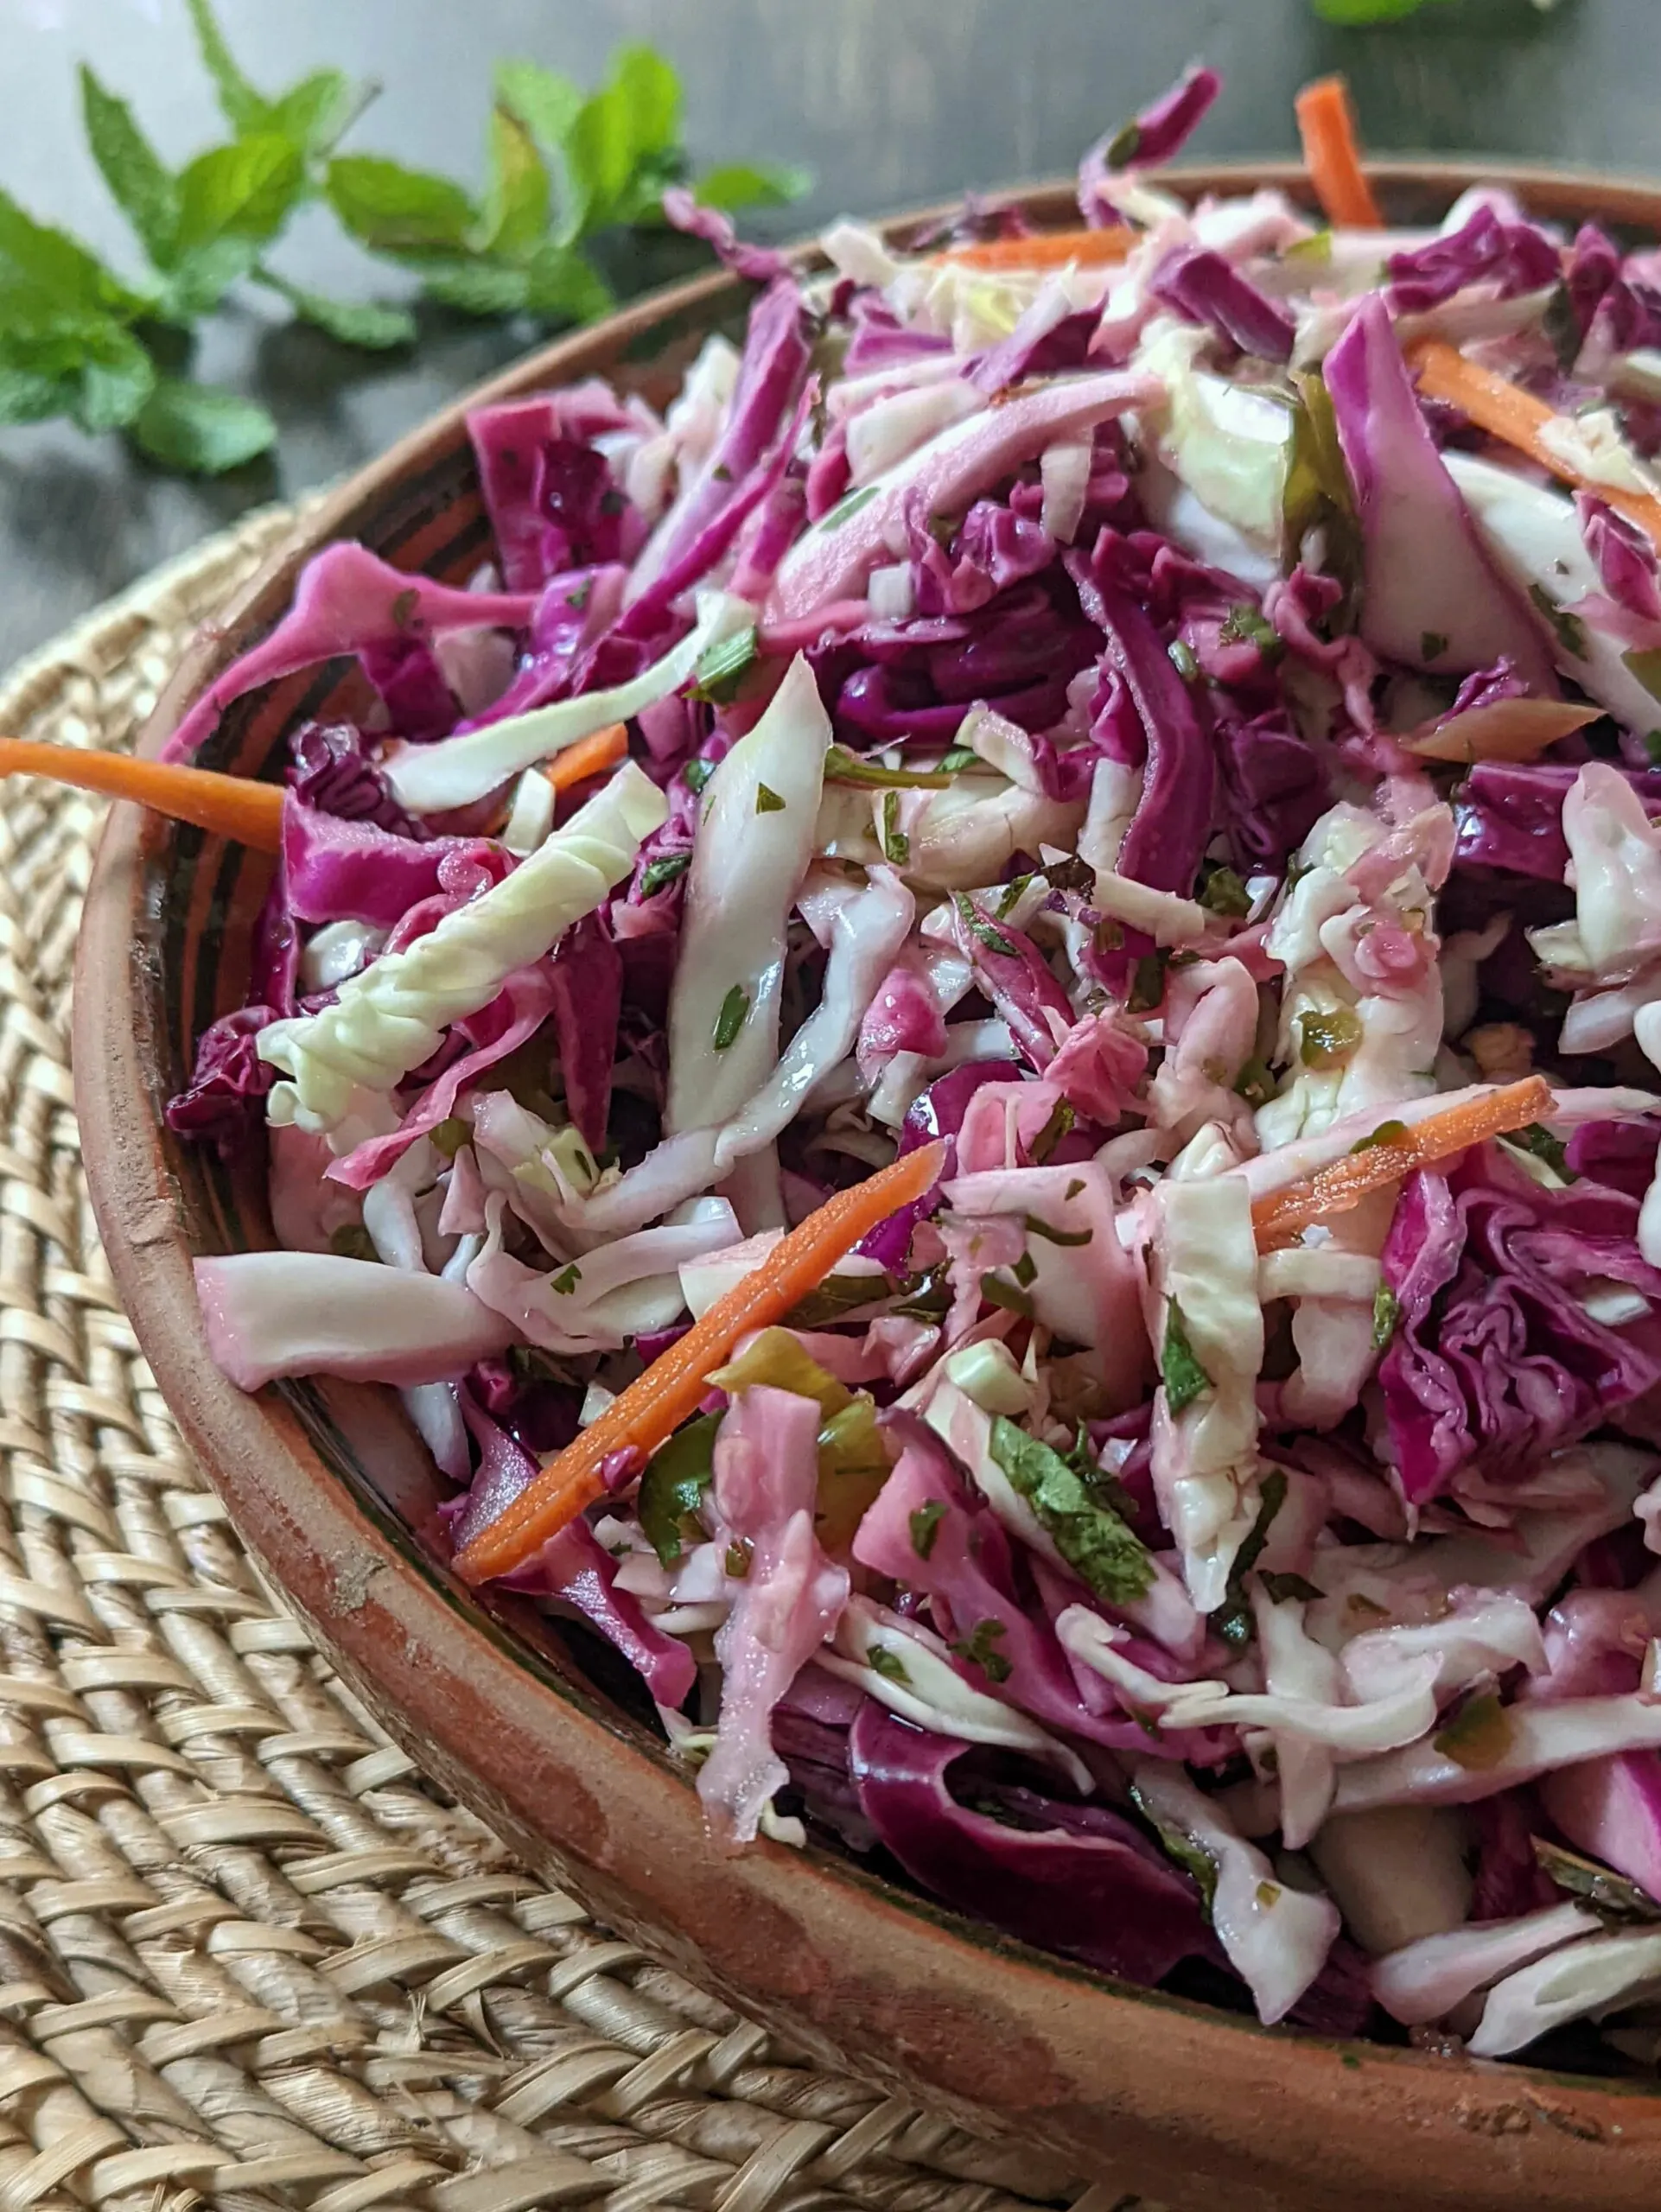 Homemade Coleslaw ready to be served.